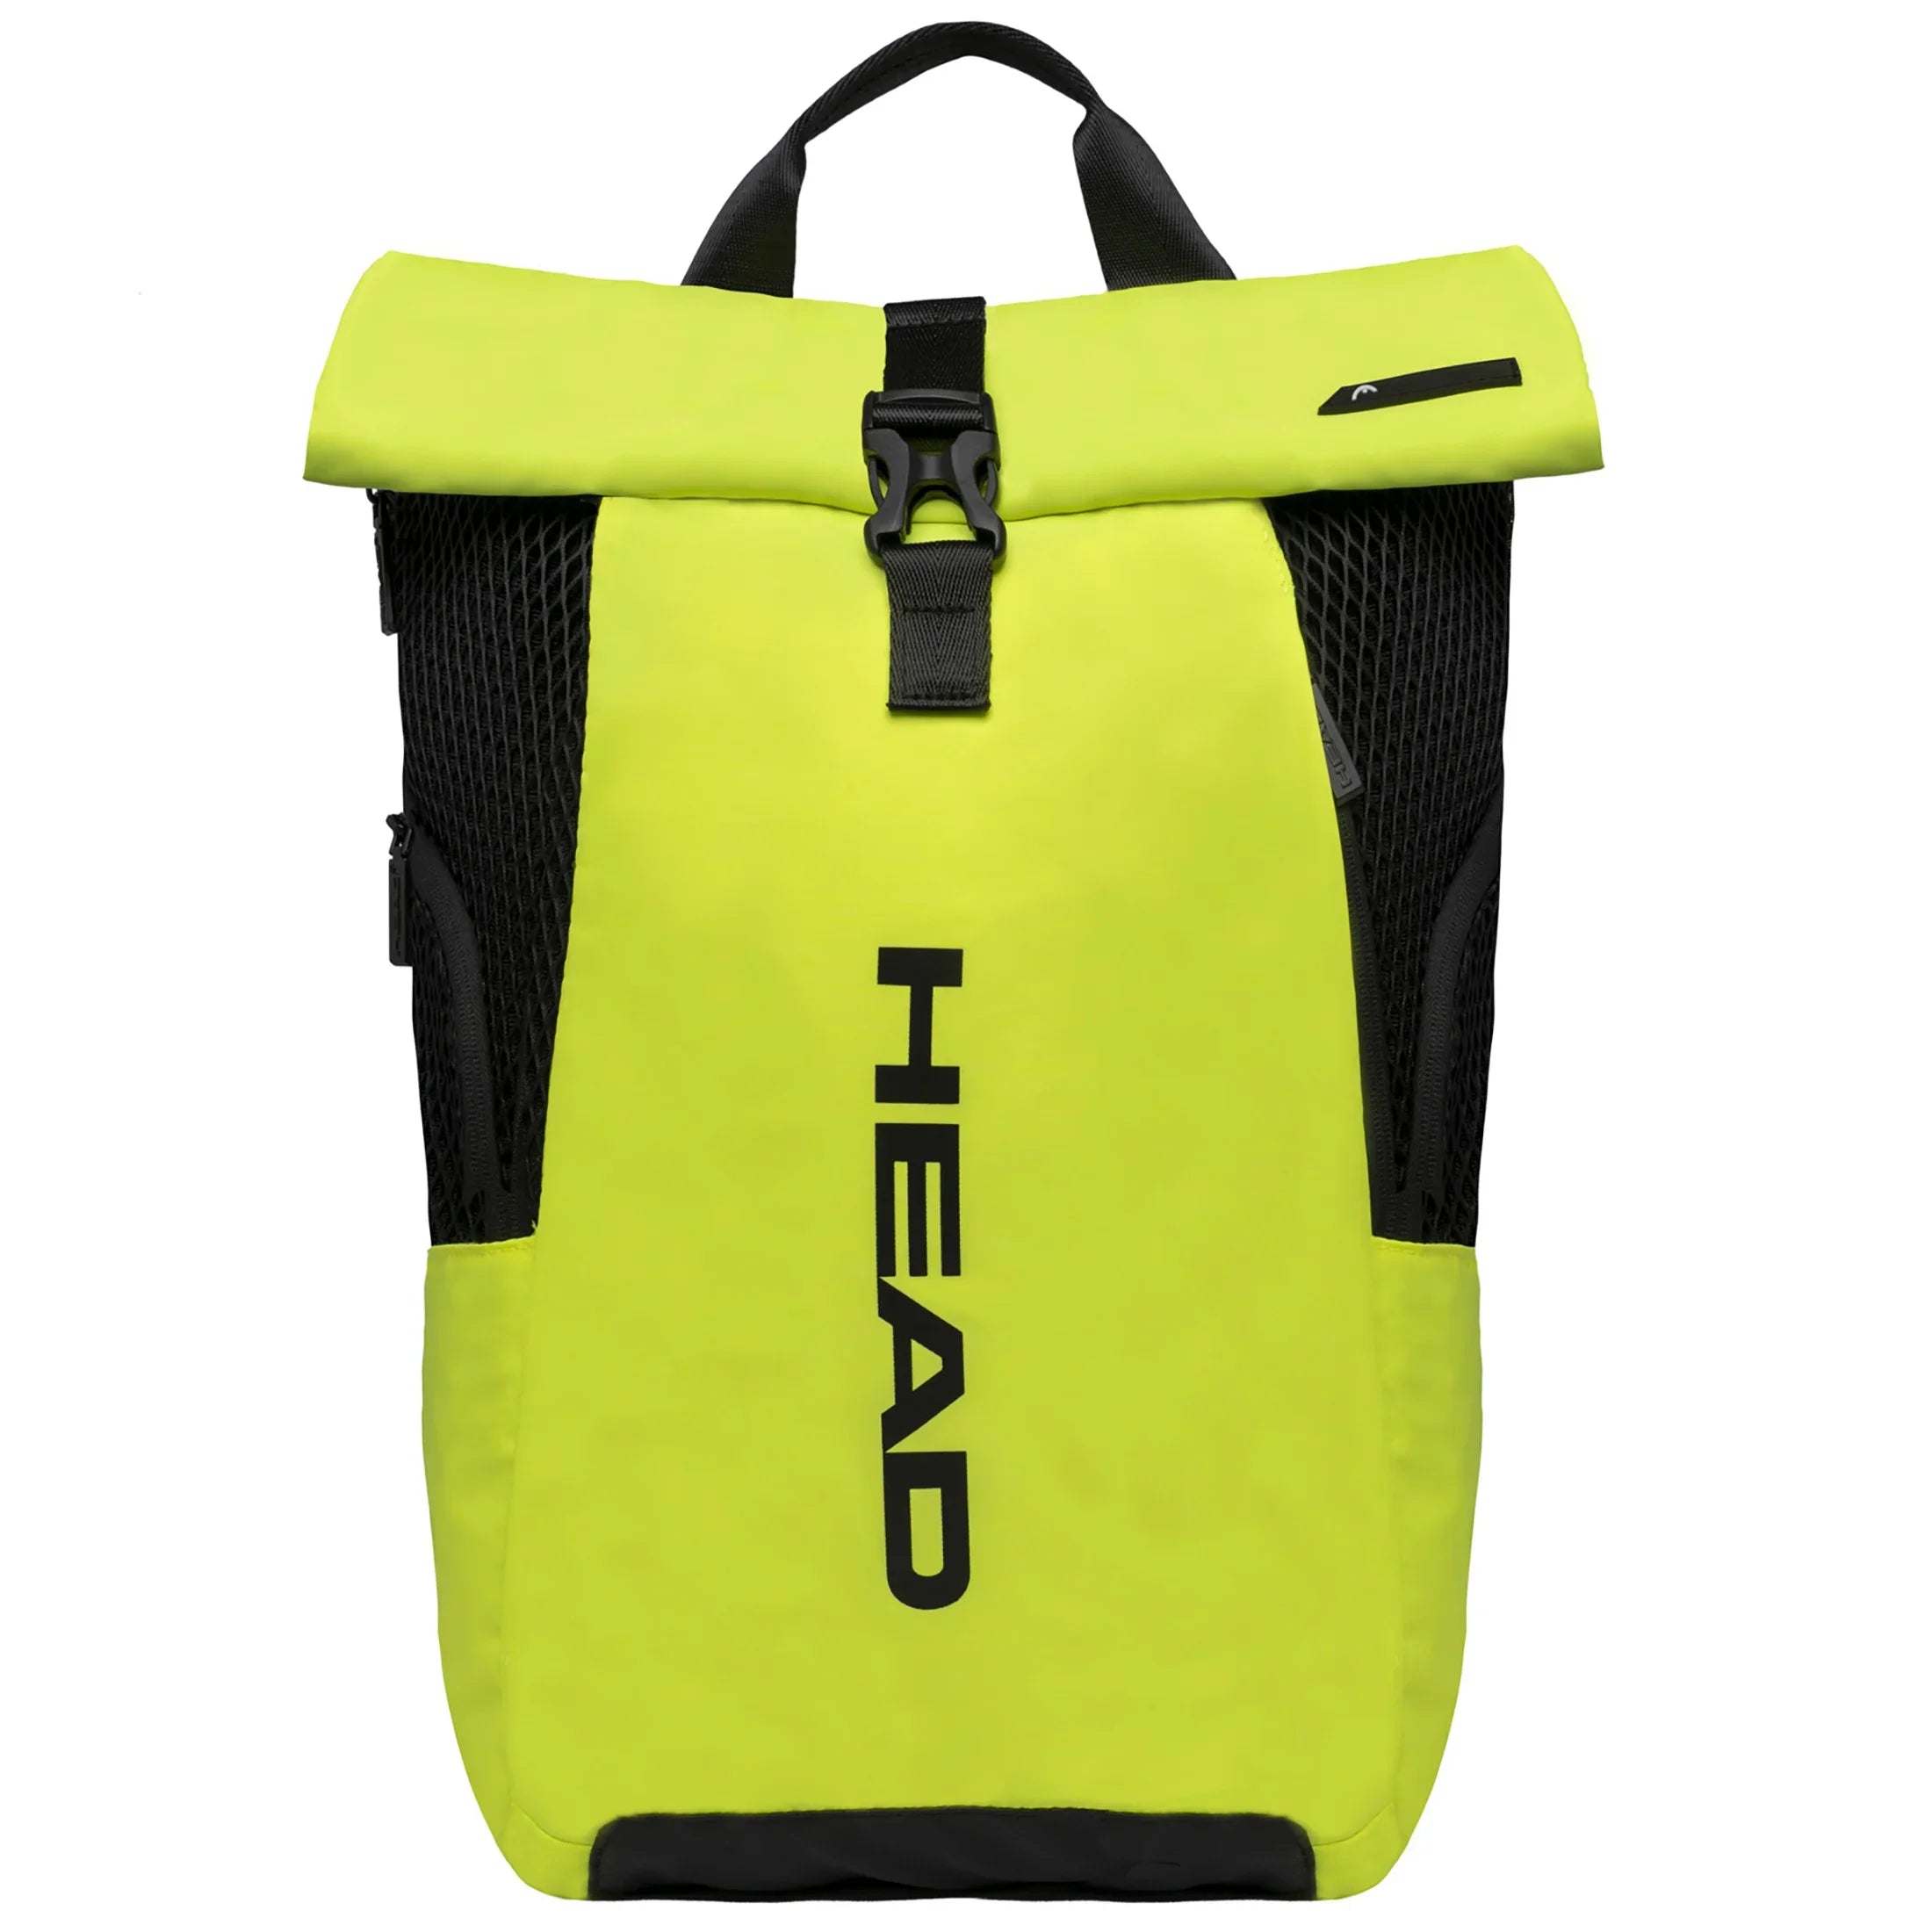 Head Net Backpack Roll-up 45 cm - yellow flou